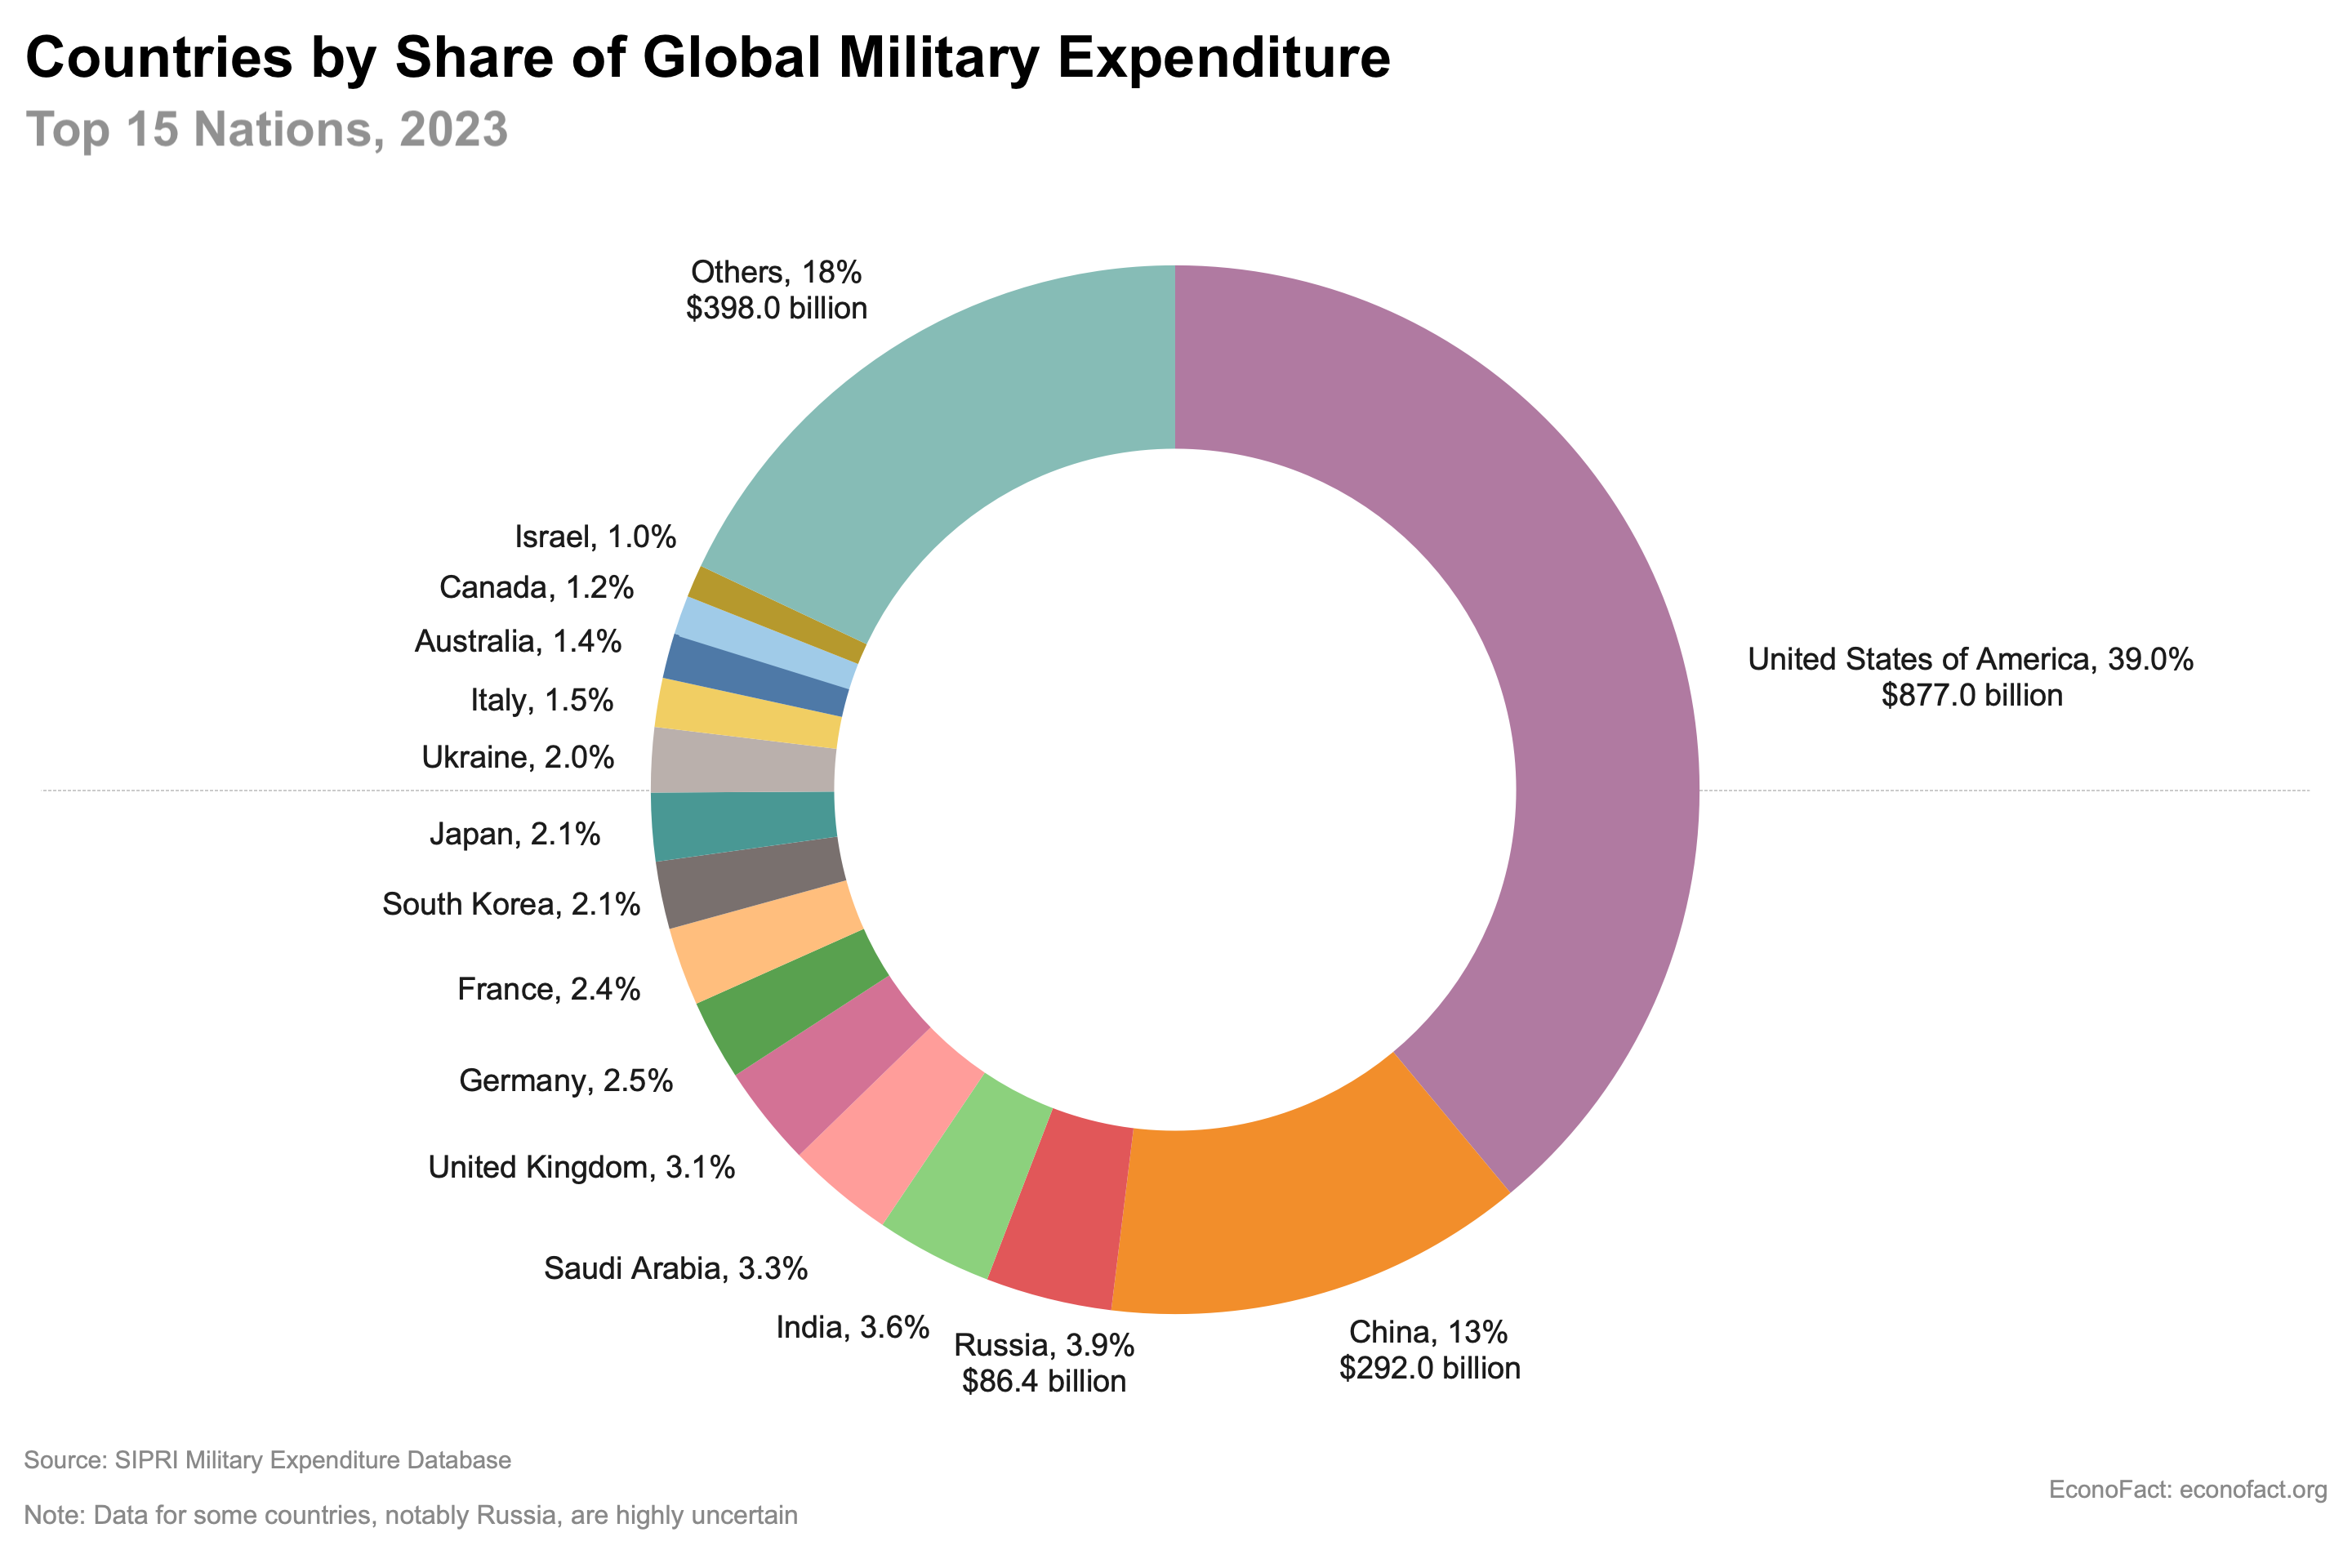 Global military spending by country, 2023. Top 15 nations.